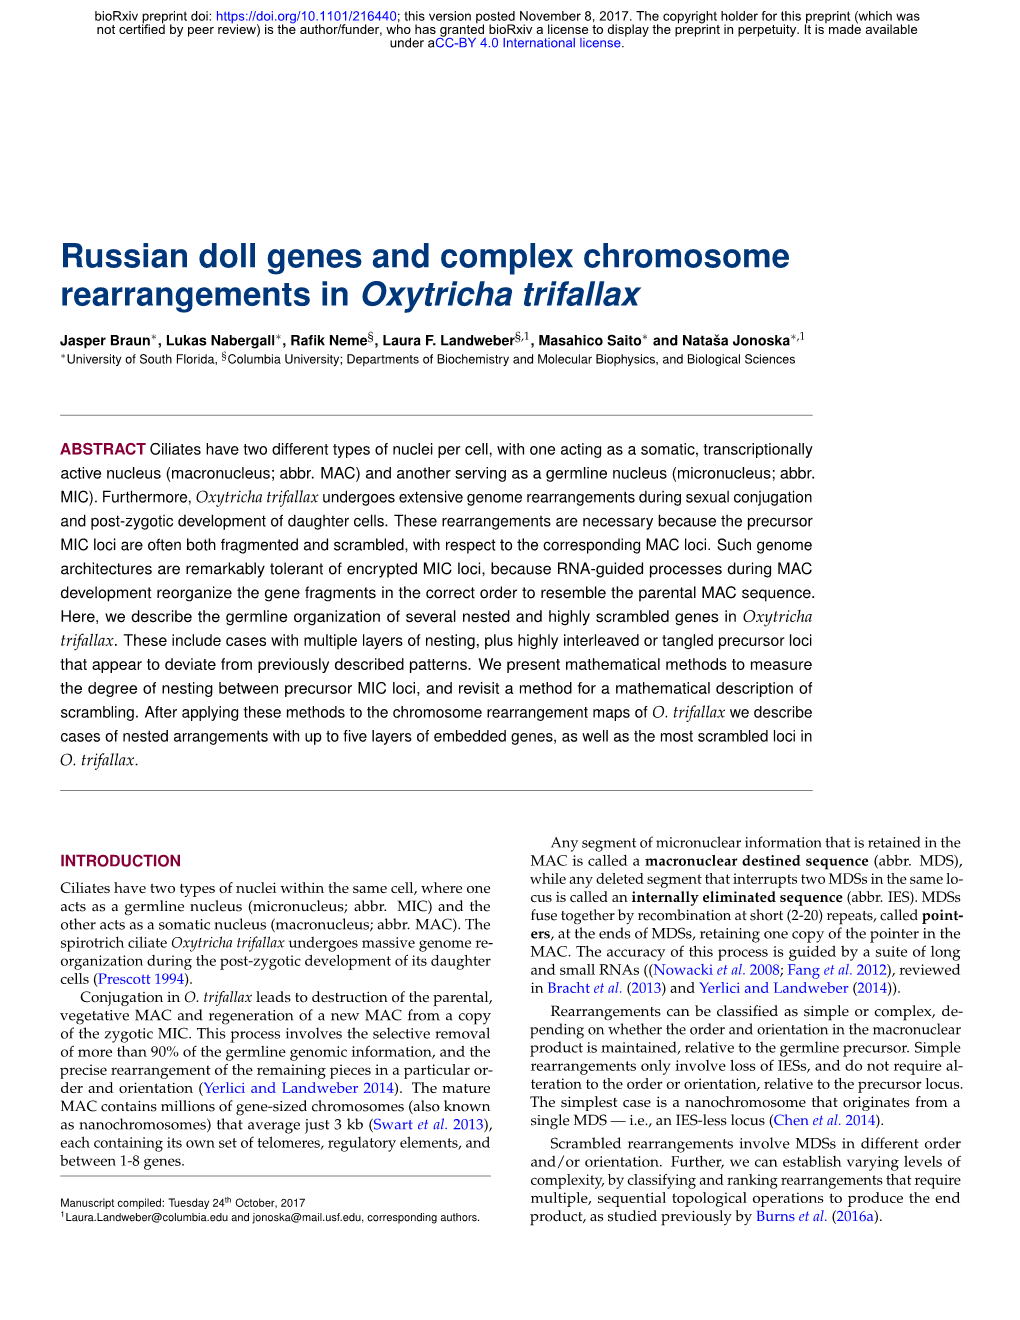 Russian Doll Genes and Complex Chromosome Rearrangements in Oxytricha Trifallax